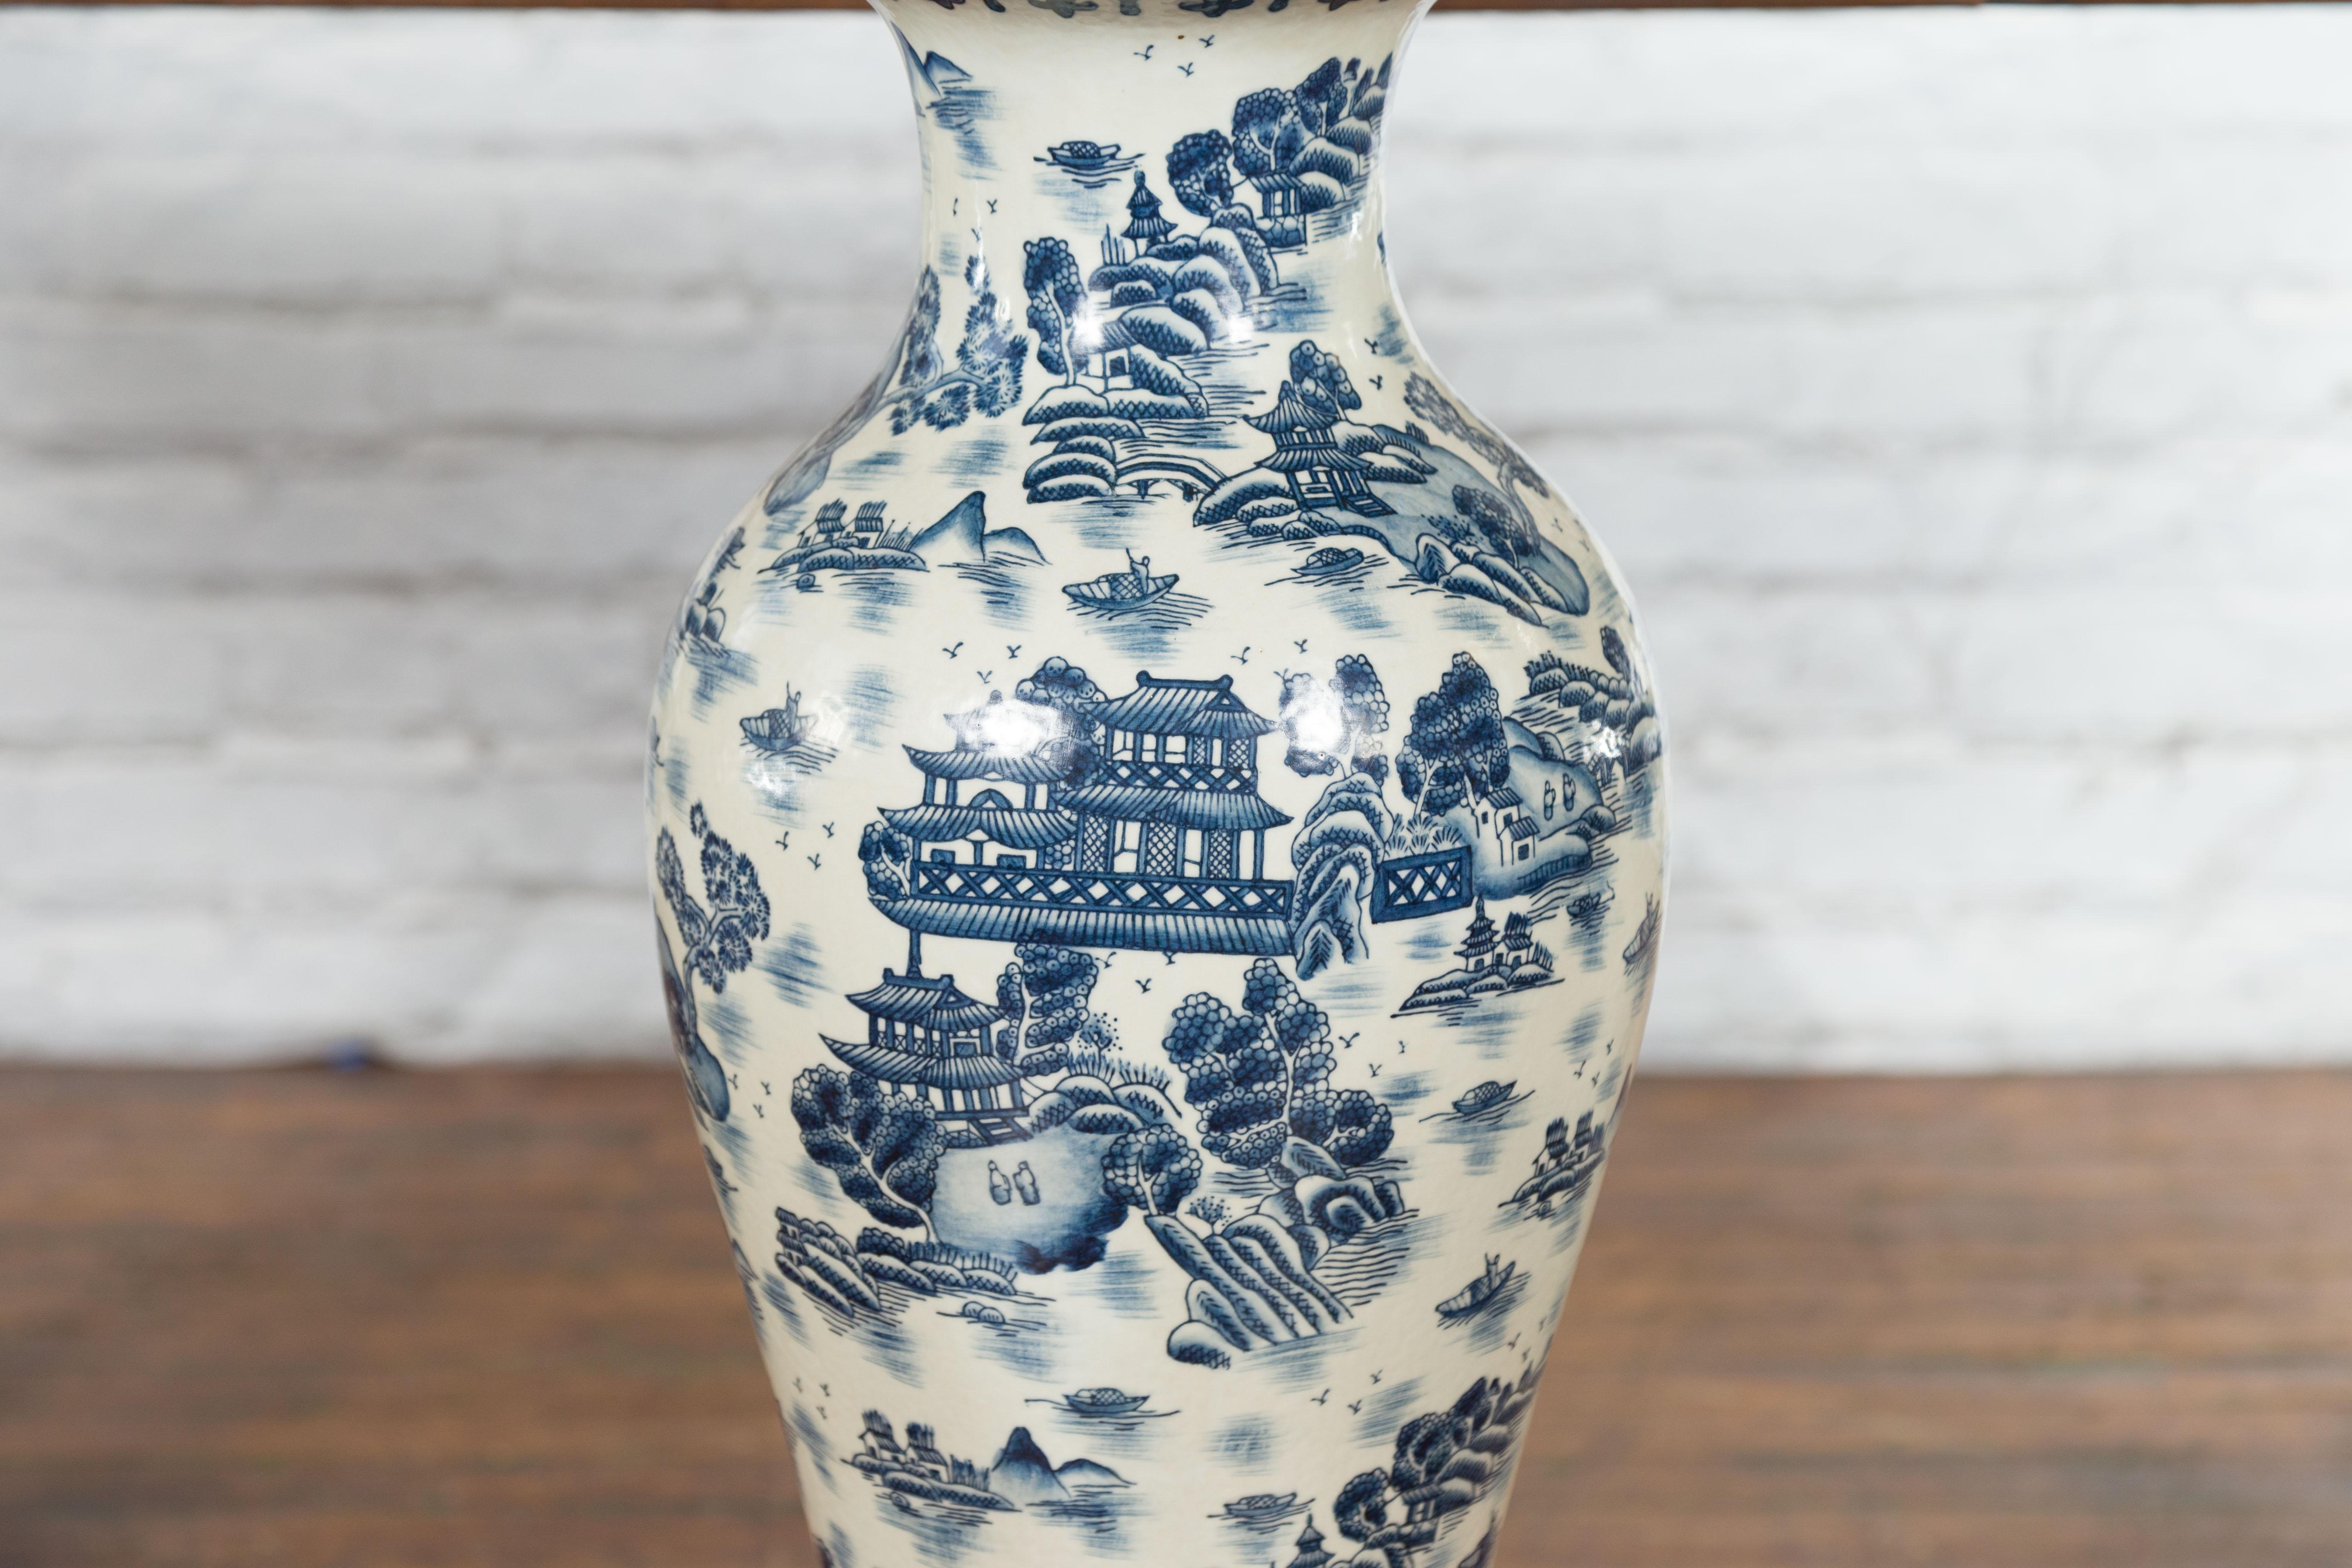 Chinese Vintage Blue and White Porcelain Vase with Landscapes and Architectures In Good Condition For Sale In Yonkers, NY